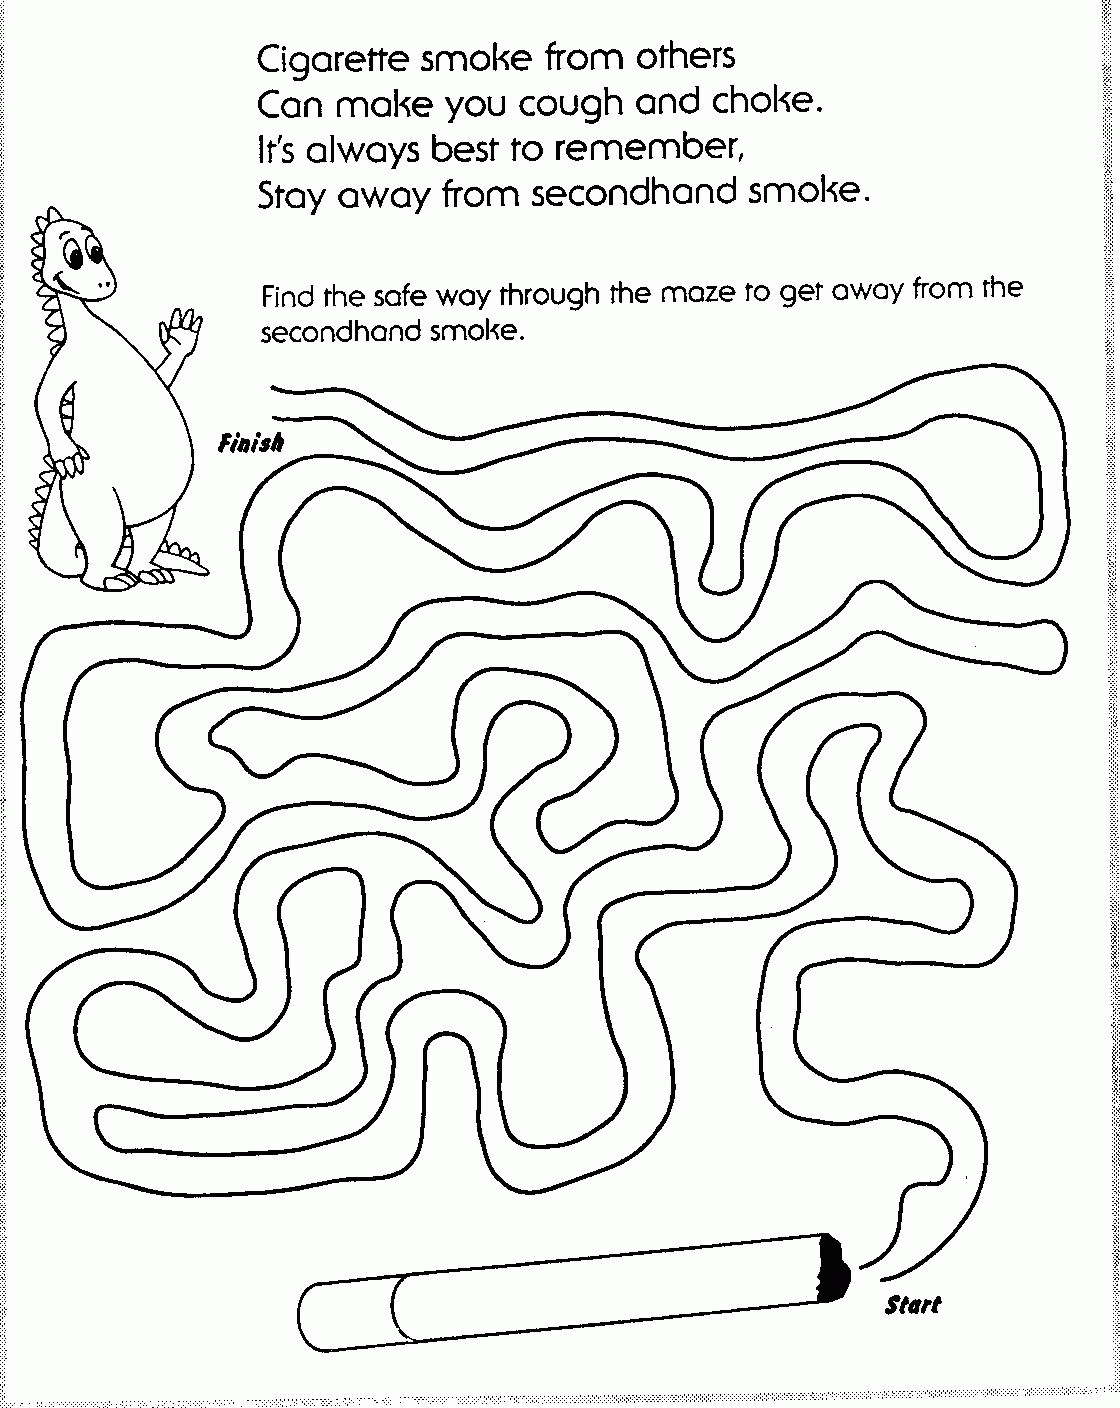 Red Ribbon Week Coloring Pages free | Only Coloring Pages